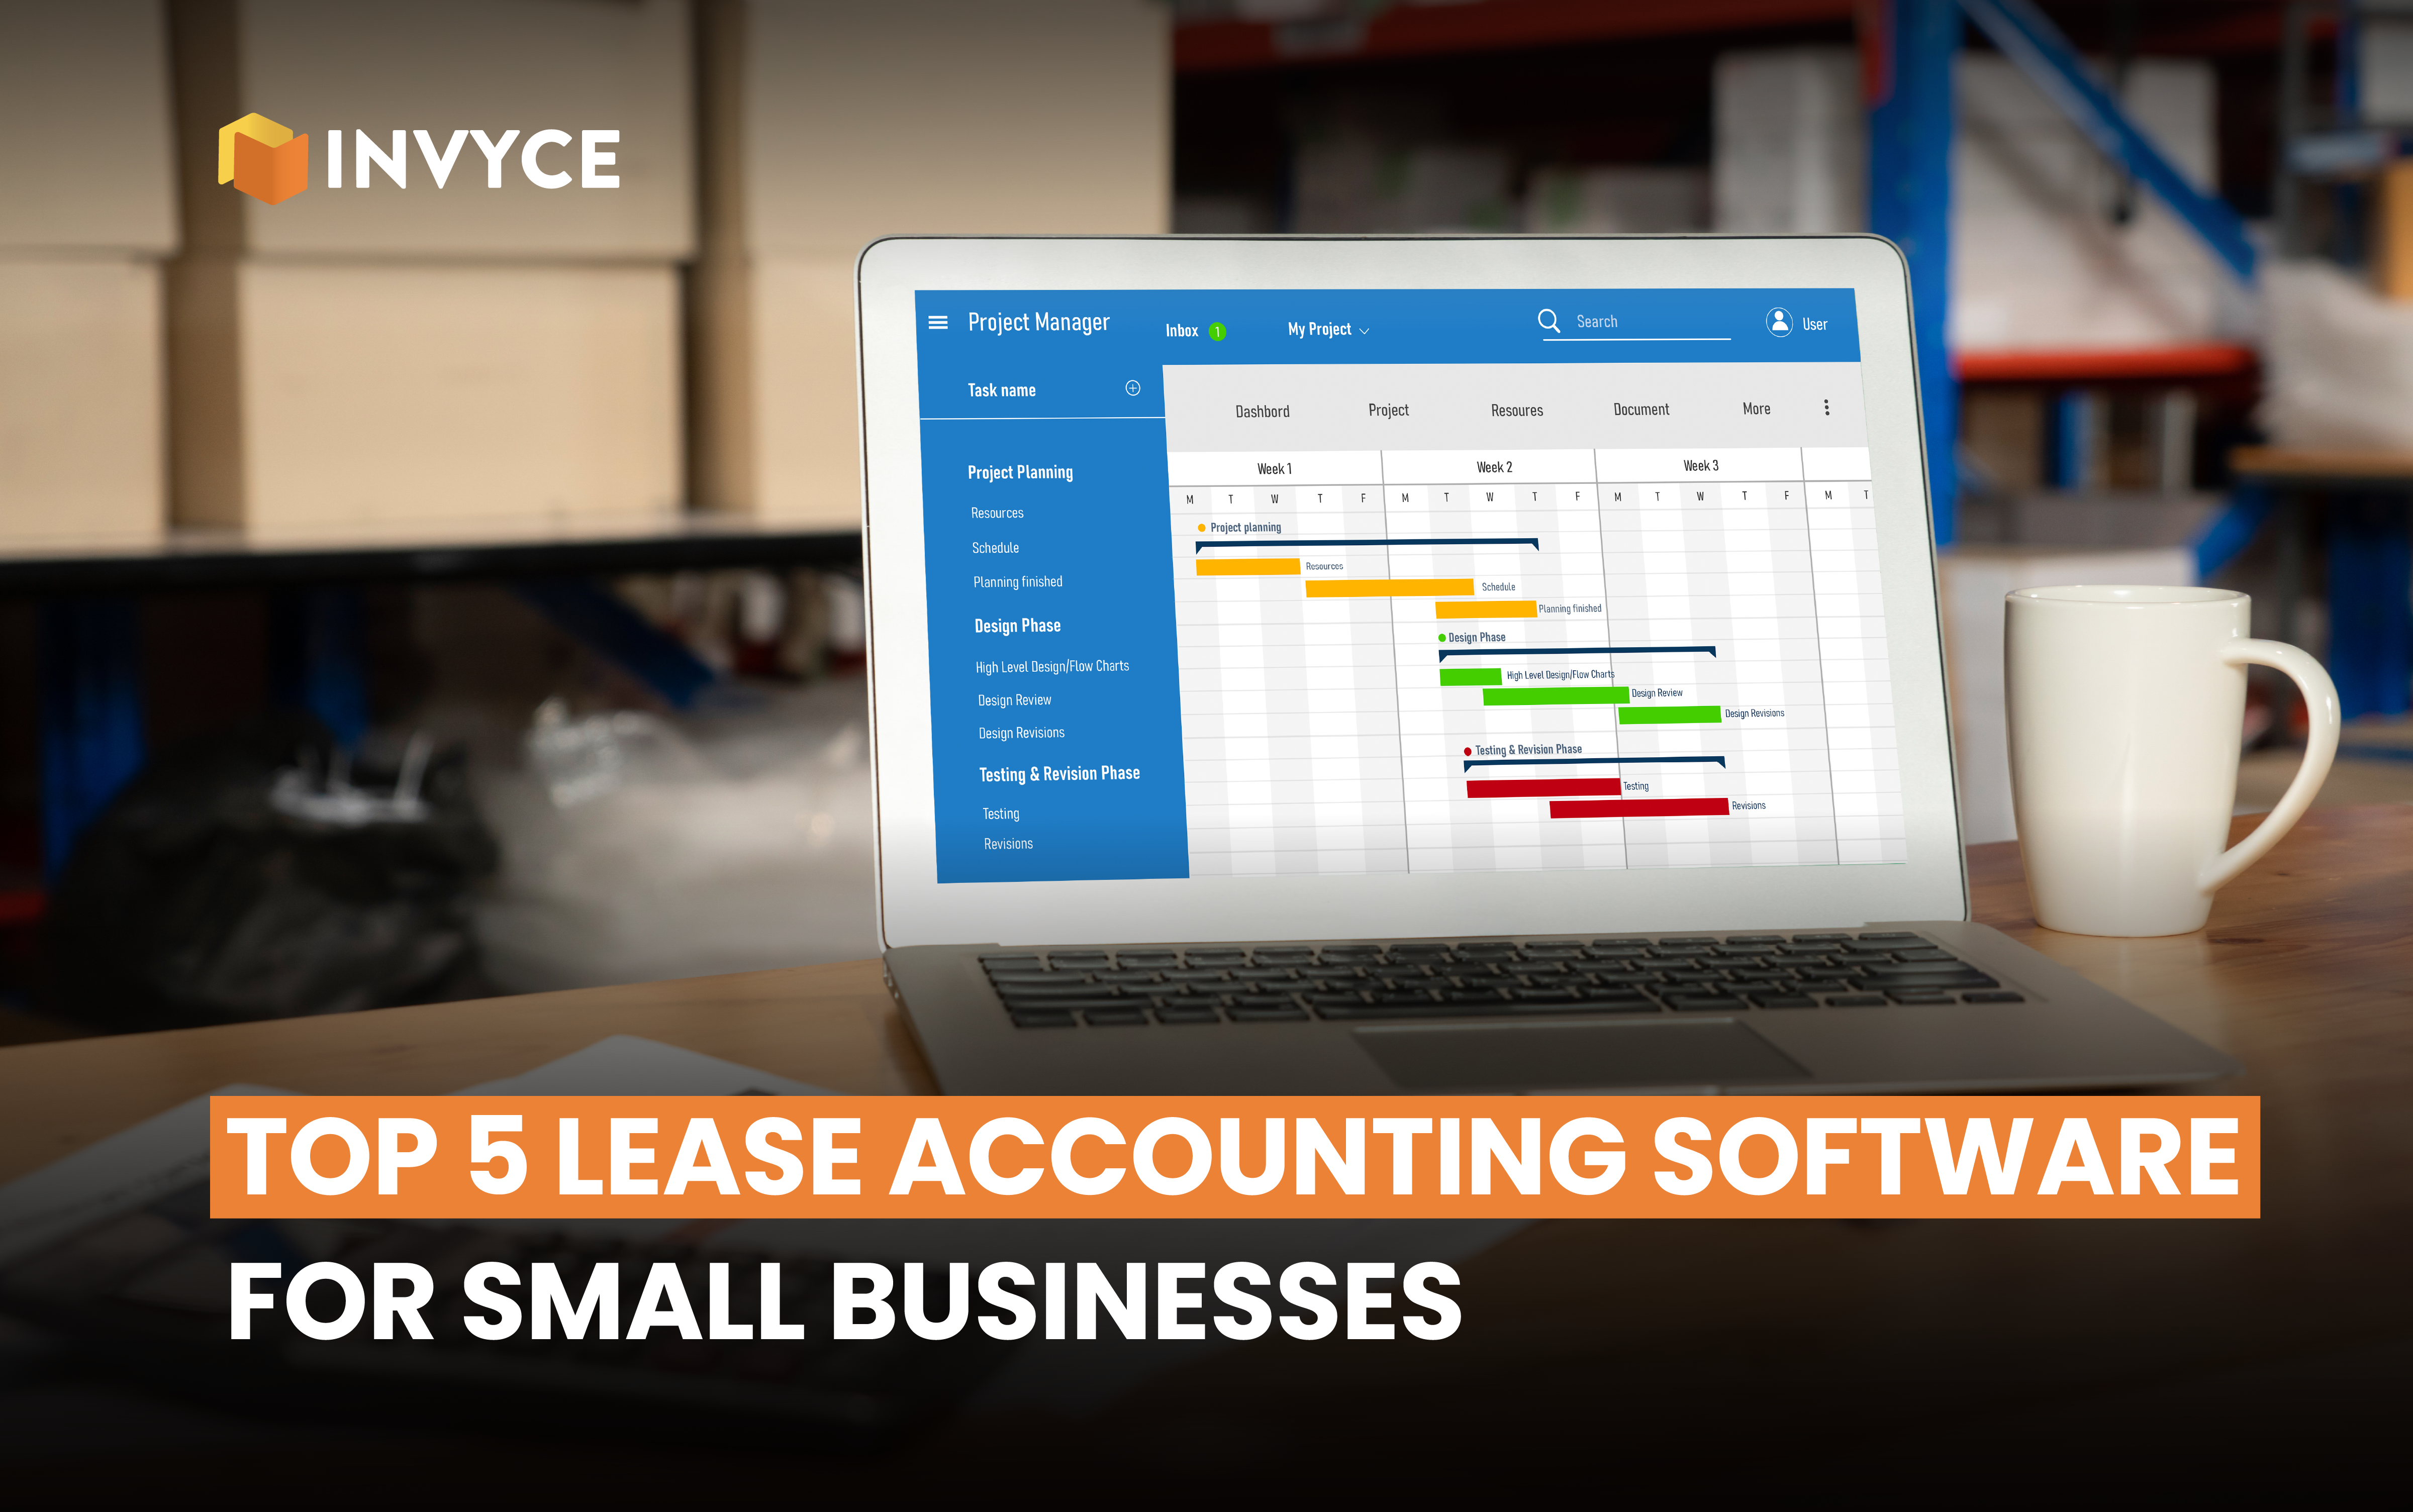 Top 5 Lease Accounting software for Small businesses